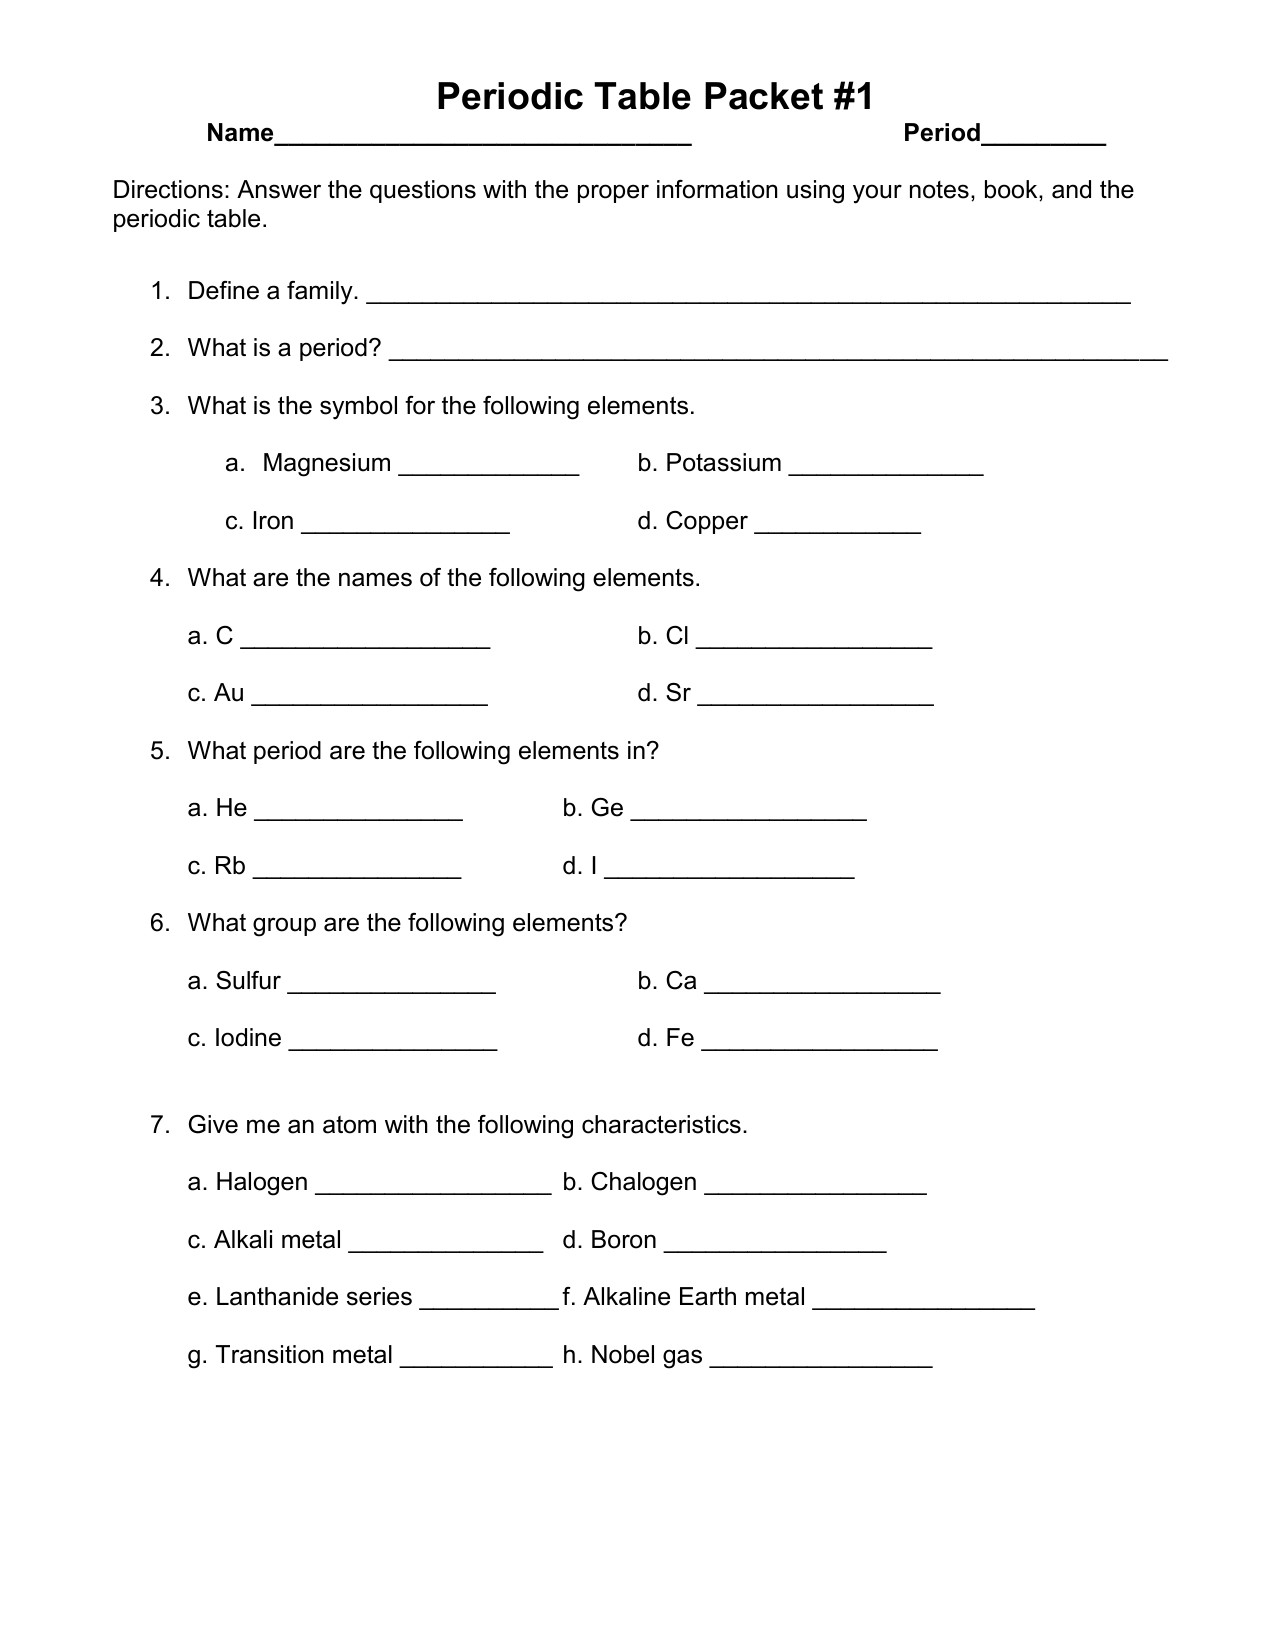 periodic table worksheet 1 answers